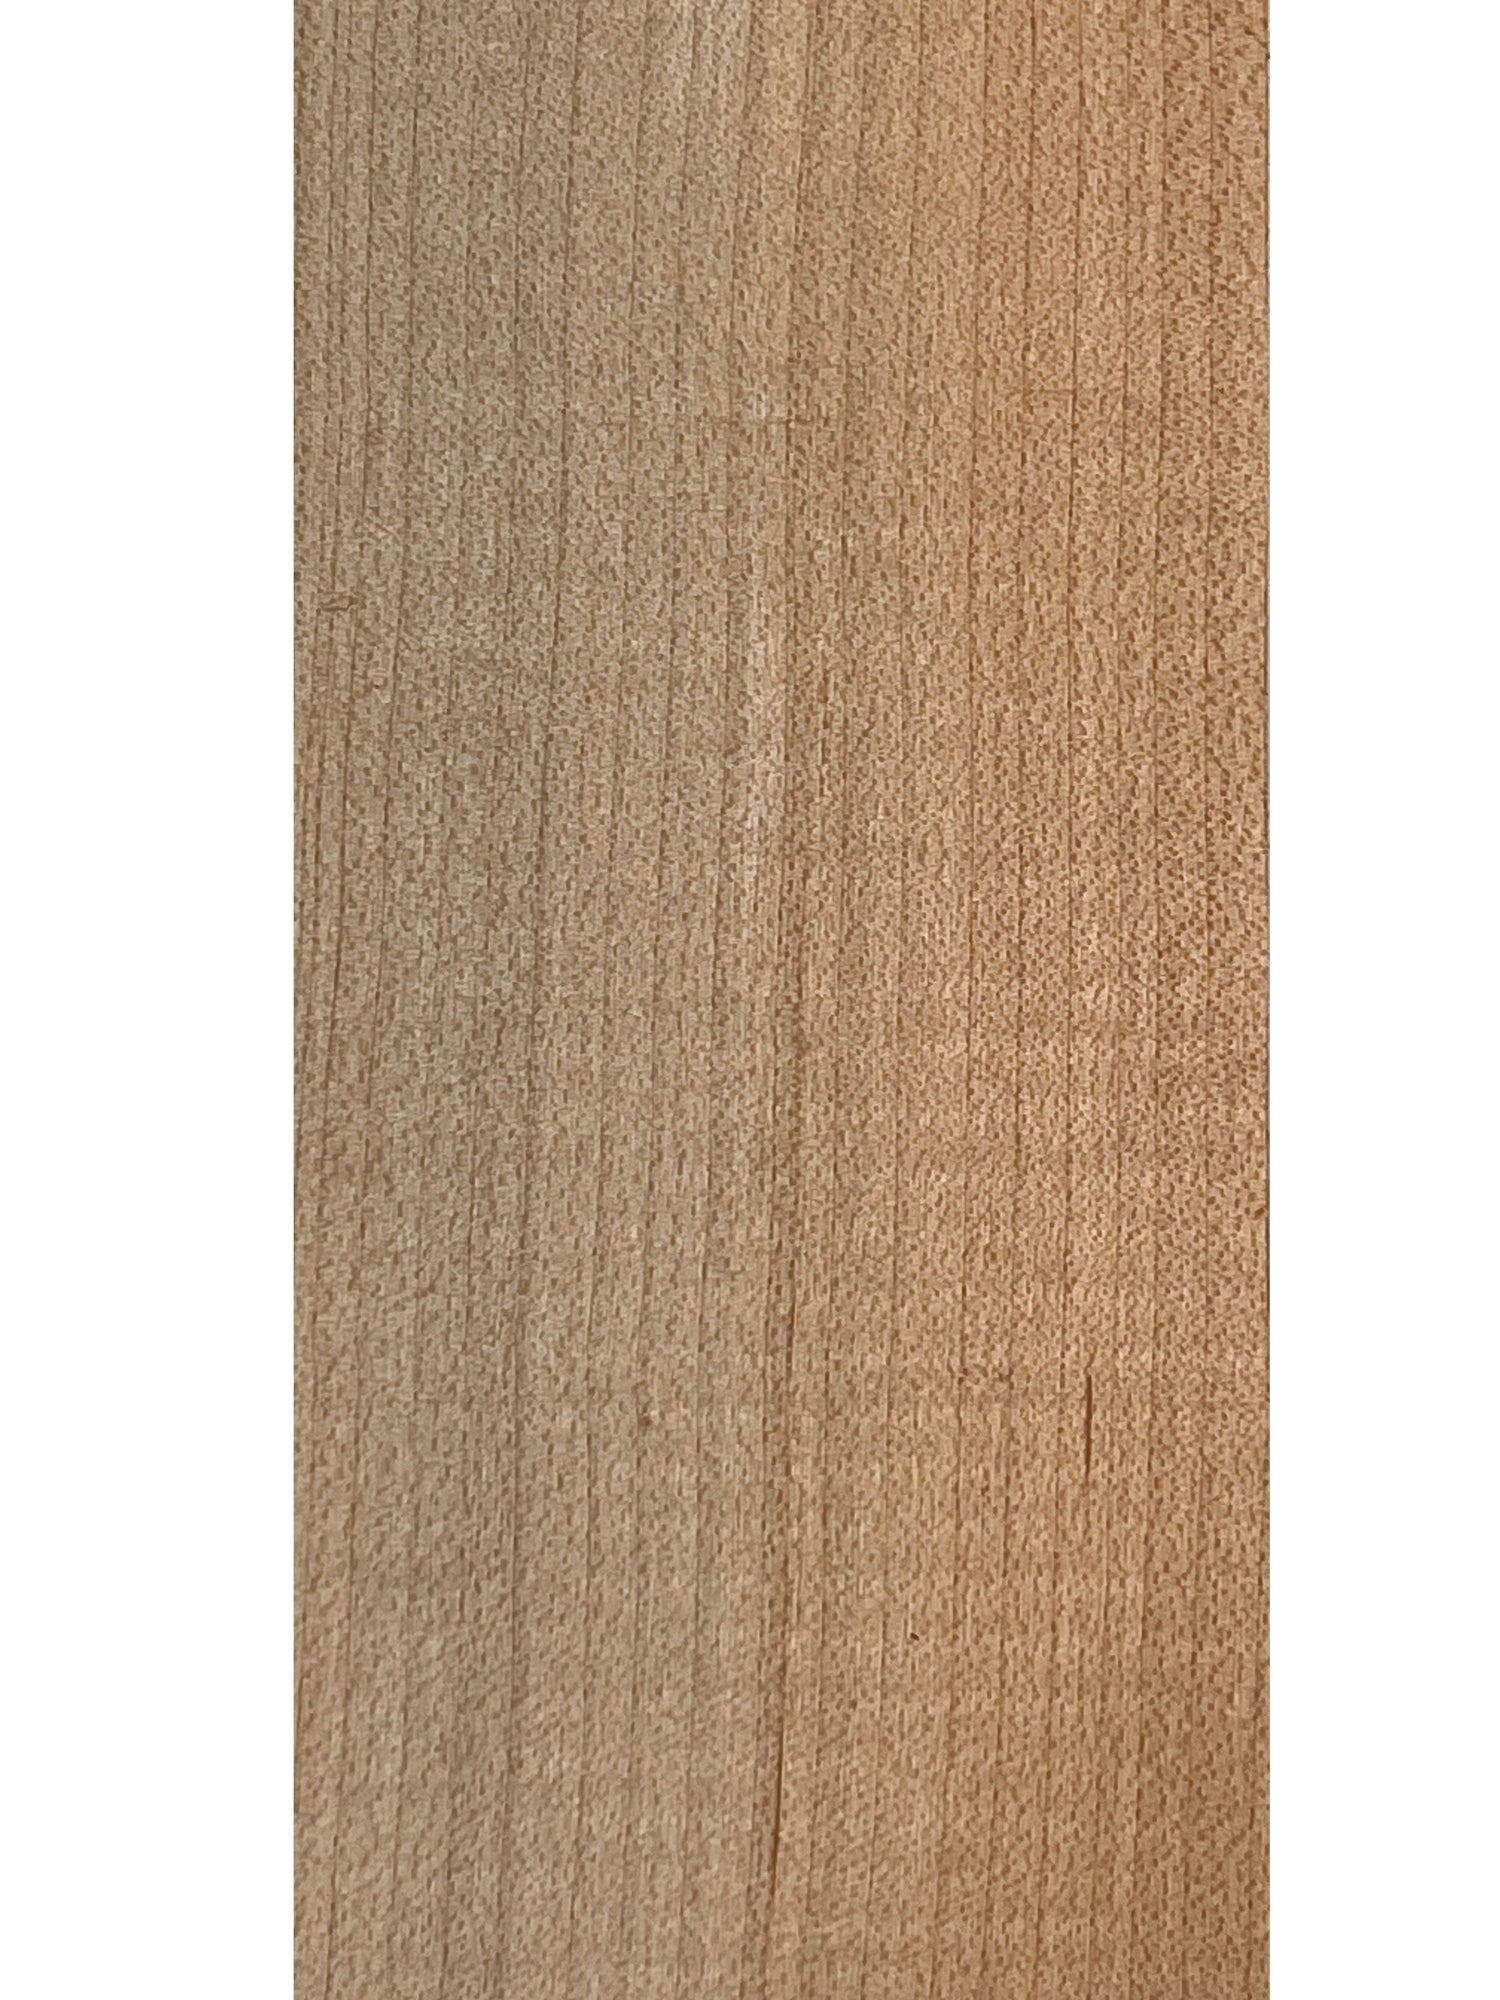 Pack of 3, Hard Maple Fingerboards/Fretboards Blanks 21&quot; x 2-3/4&quot; x 3/8&quot; - Exotic Wood Zone - Buy online Across USA 